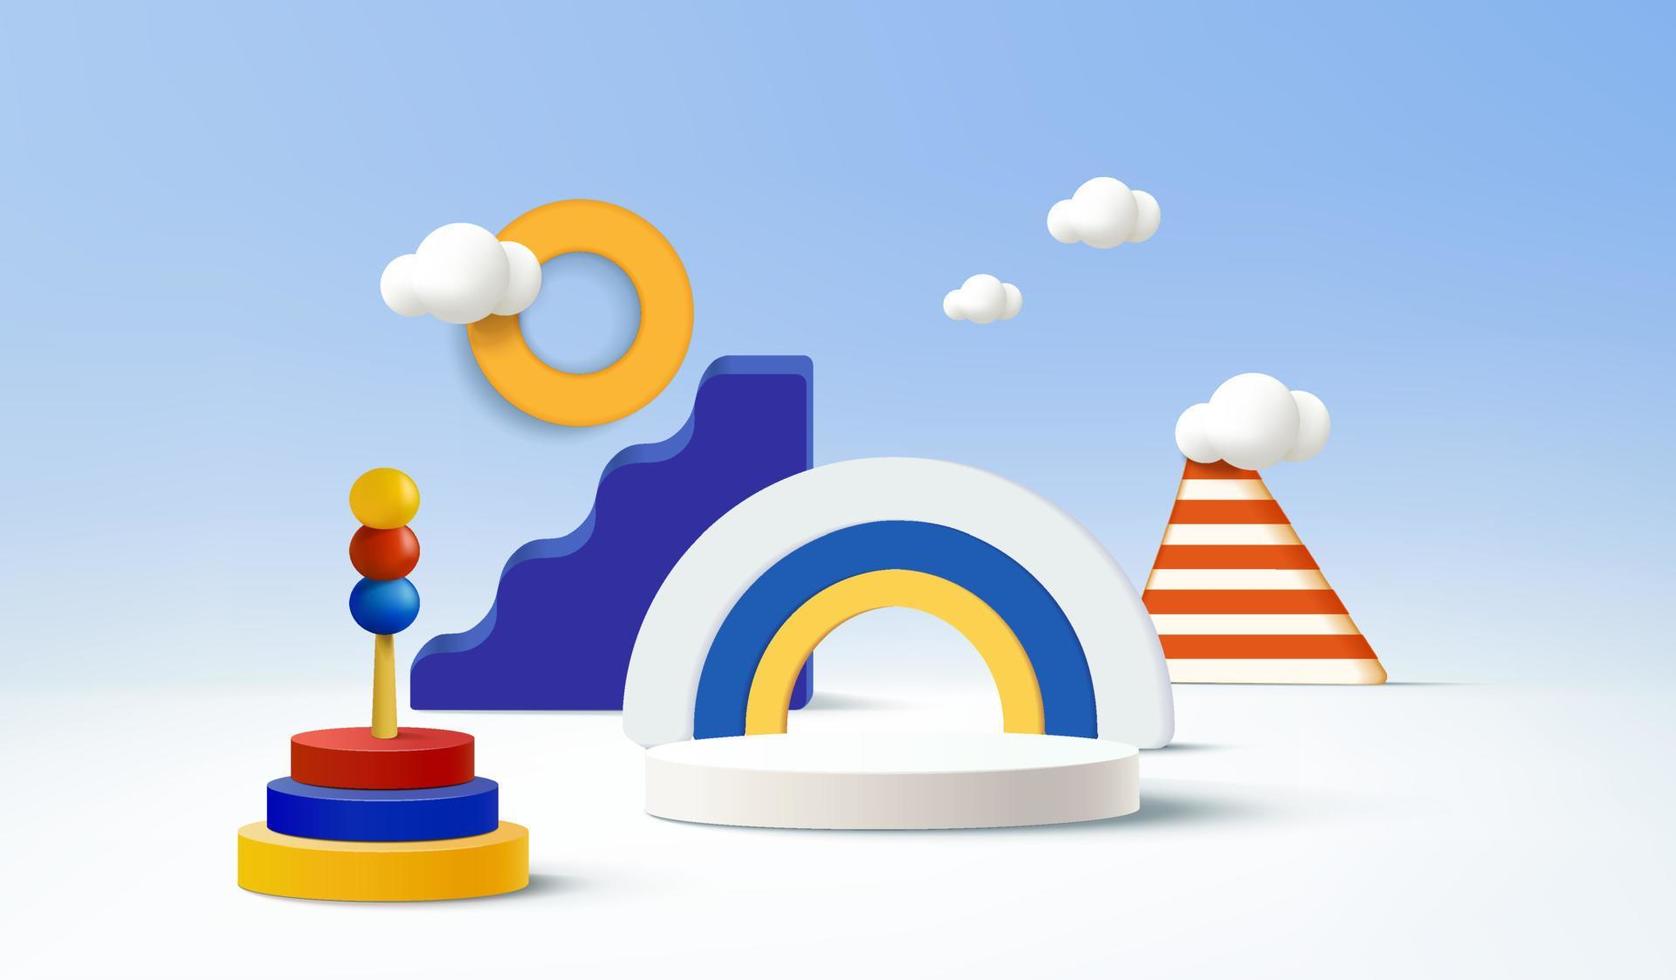 3d podium on colorful background abstract geometric shapes with cute rainbow, kids product display vector